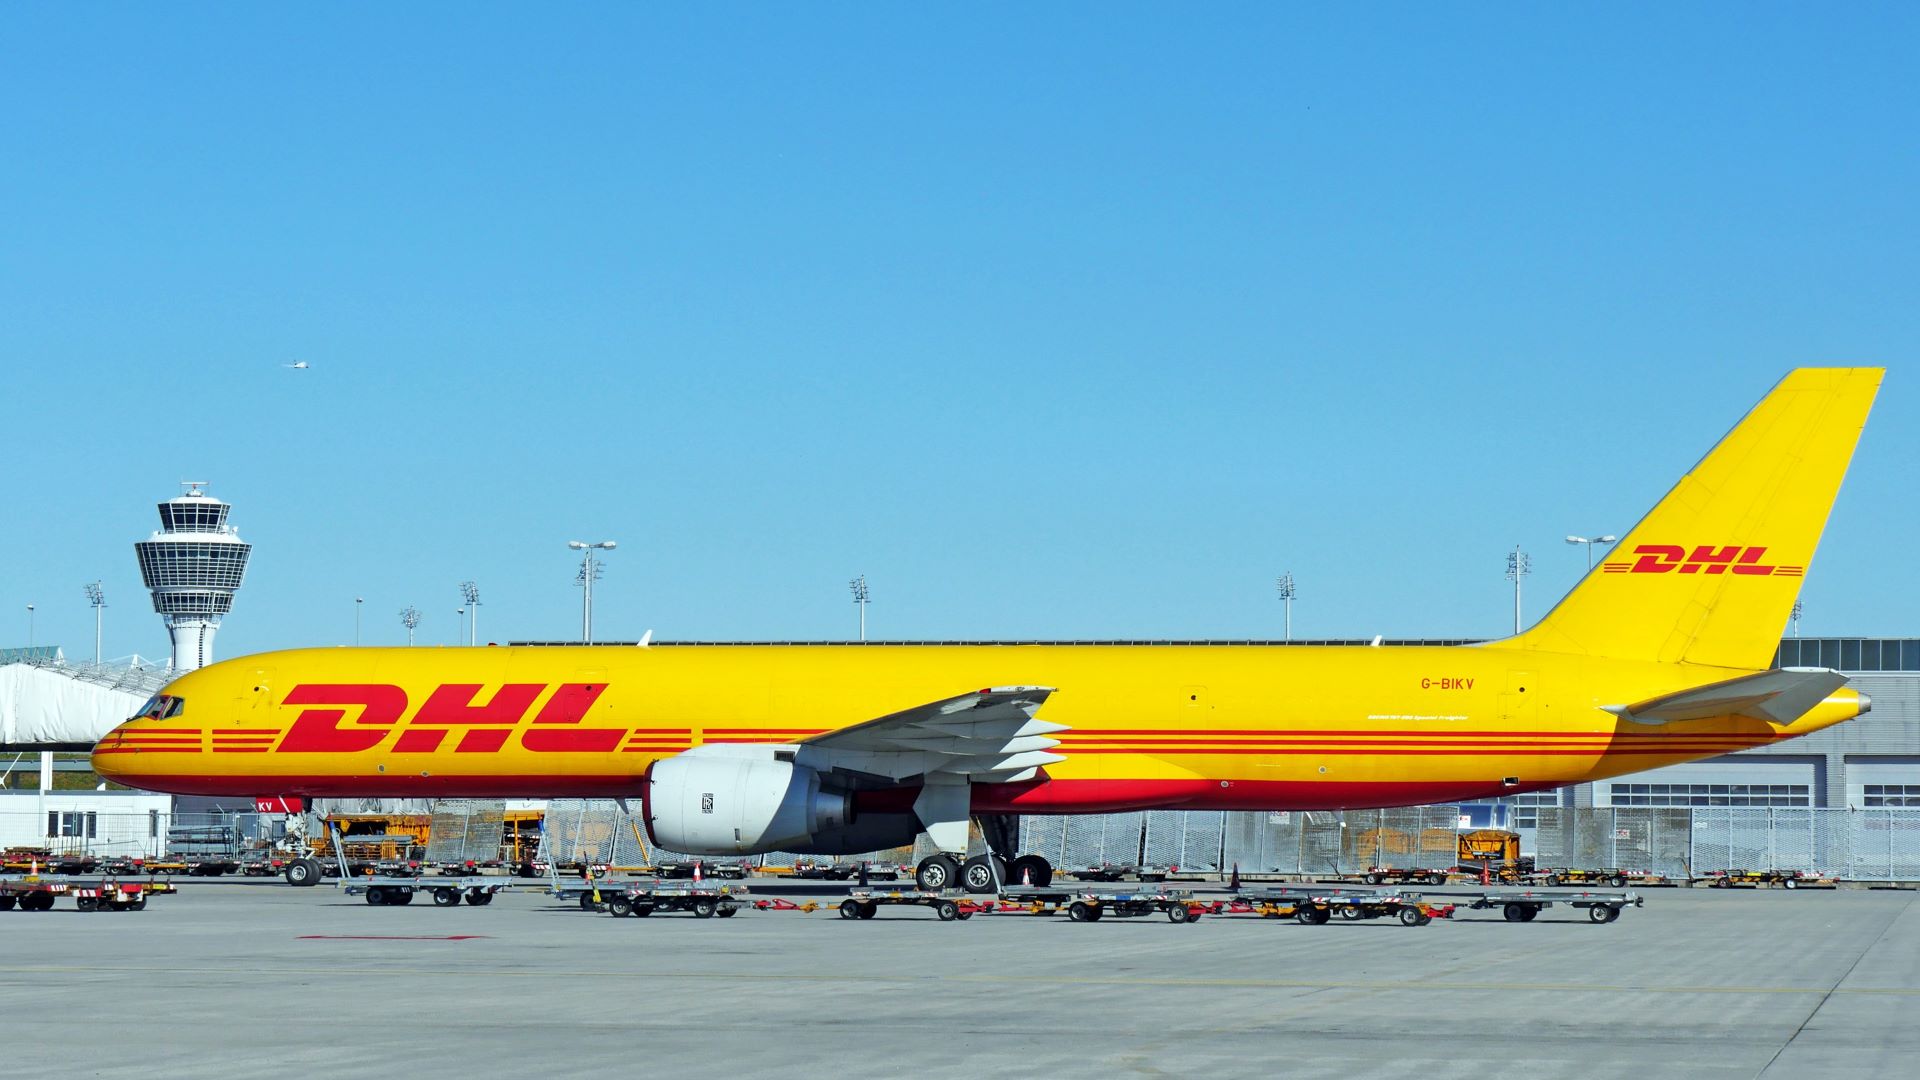 A mustard-yellow DHL plane on the tarmac on sunny day.